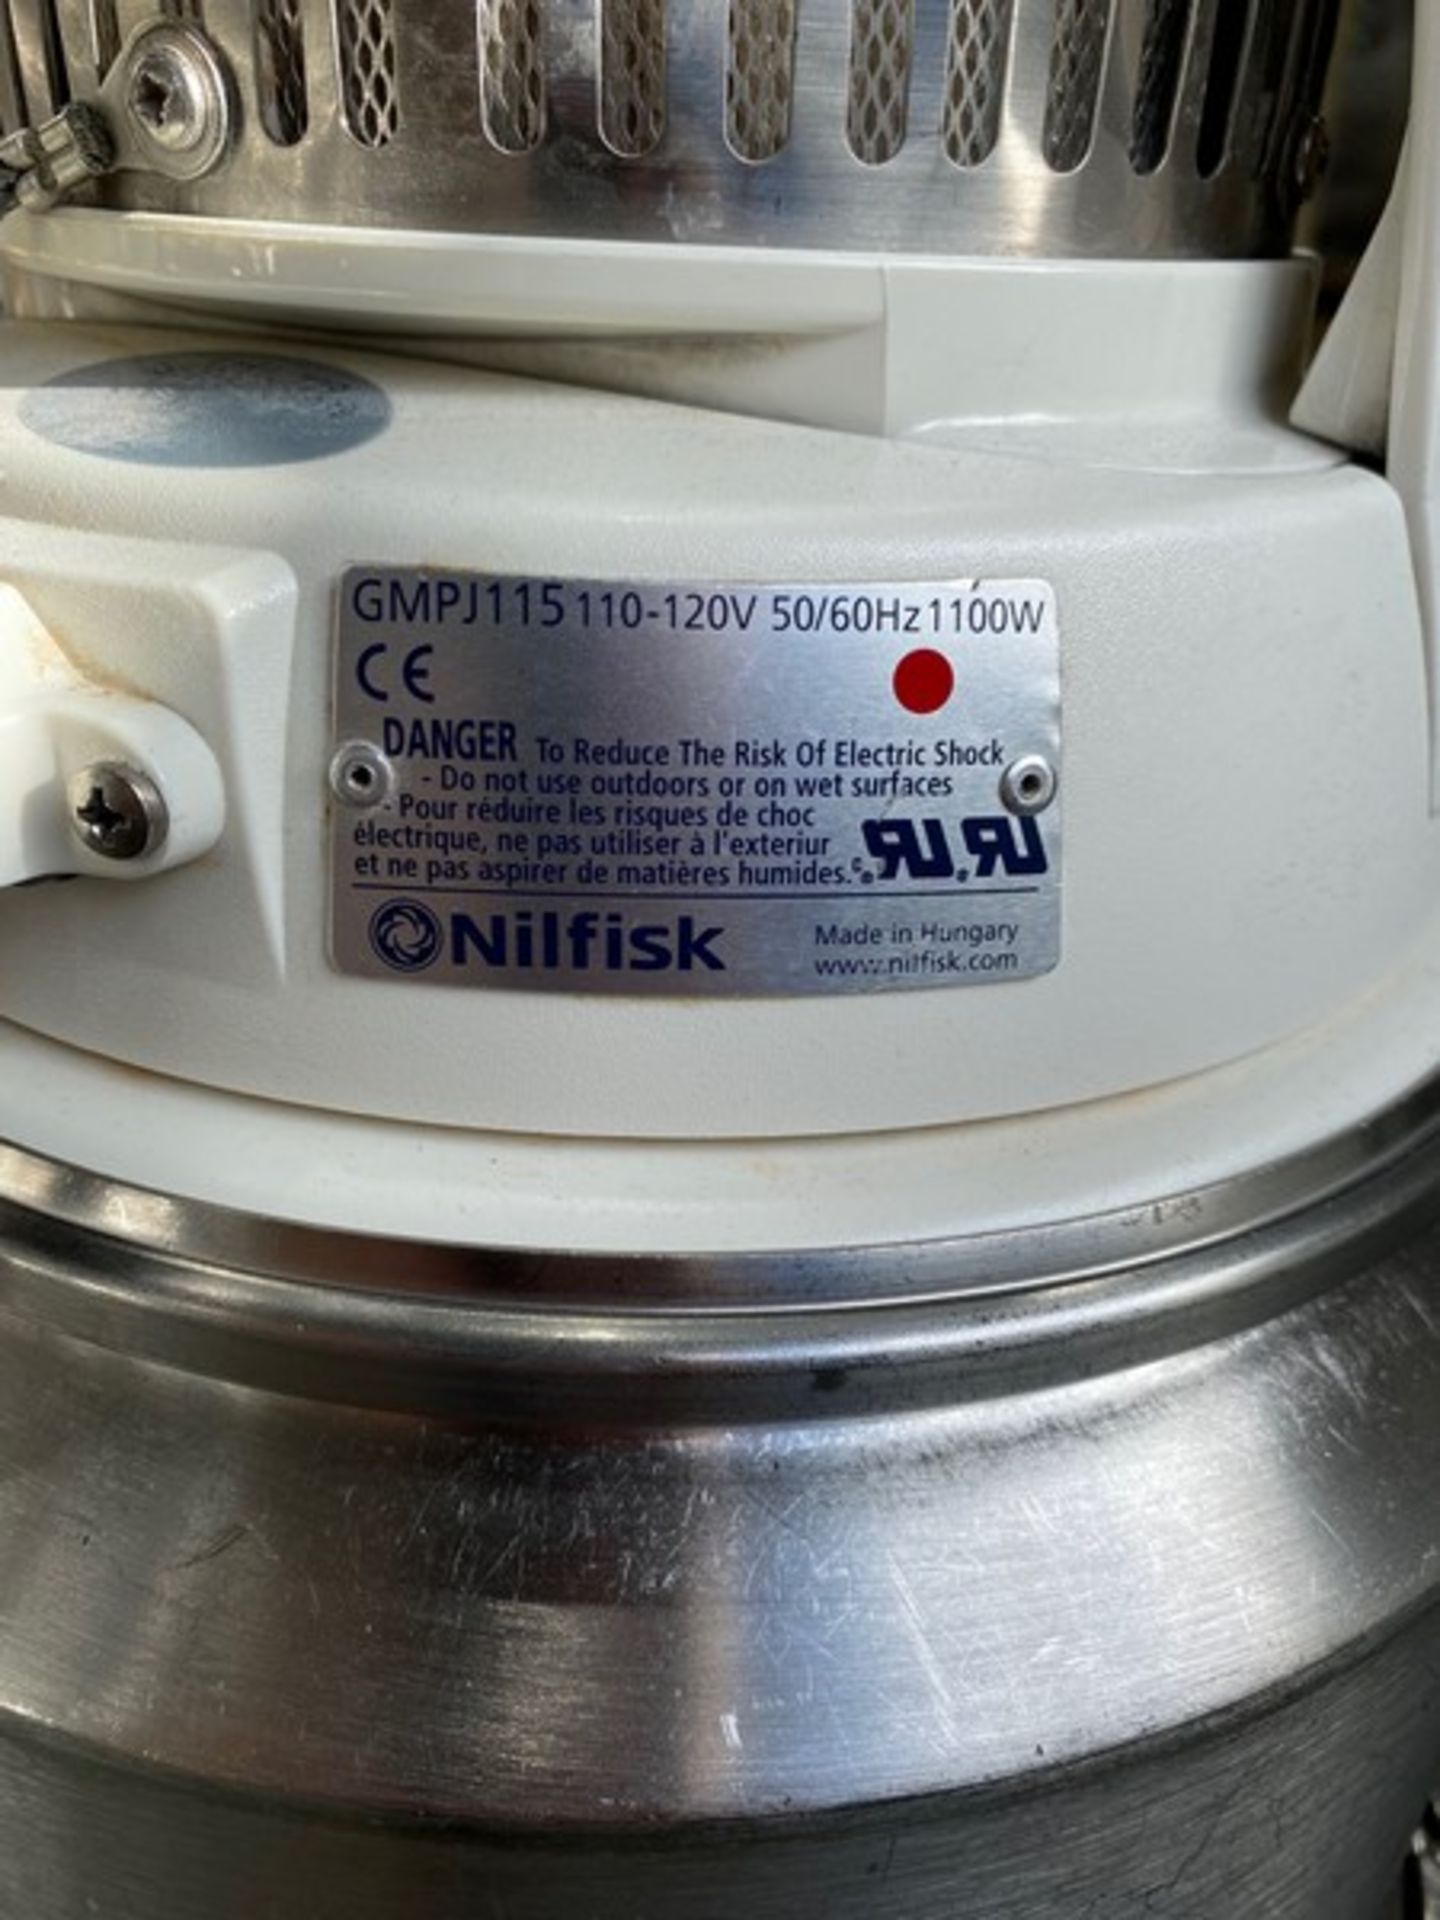 Nilfisk Critical Area Stainless Steel Vacuums. Model: IVT/1000CR, Vacuum has been run tested, As - Image 3 of 3